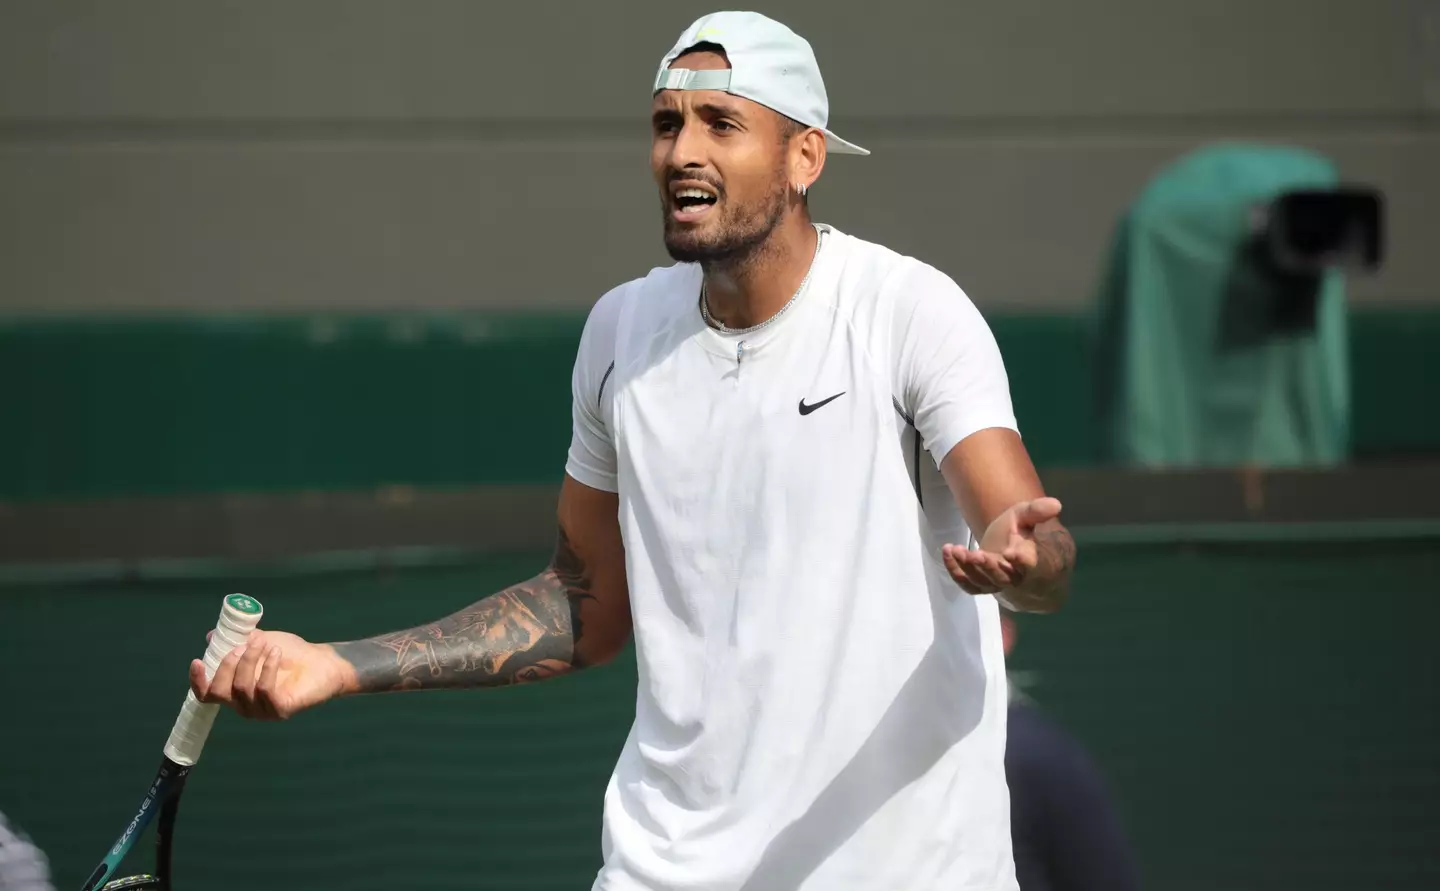 Kyrgios is known for his on-court outbursts.